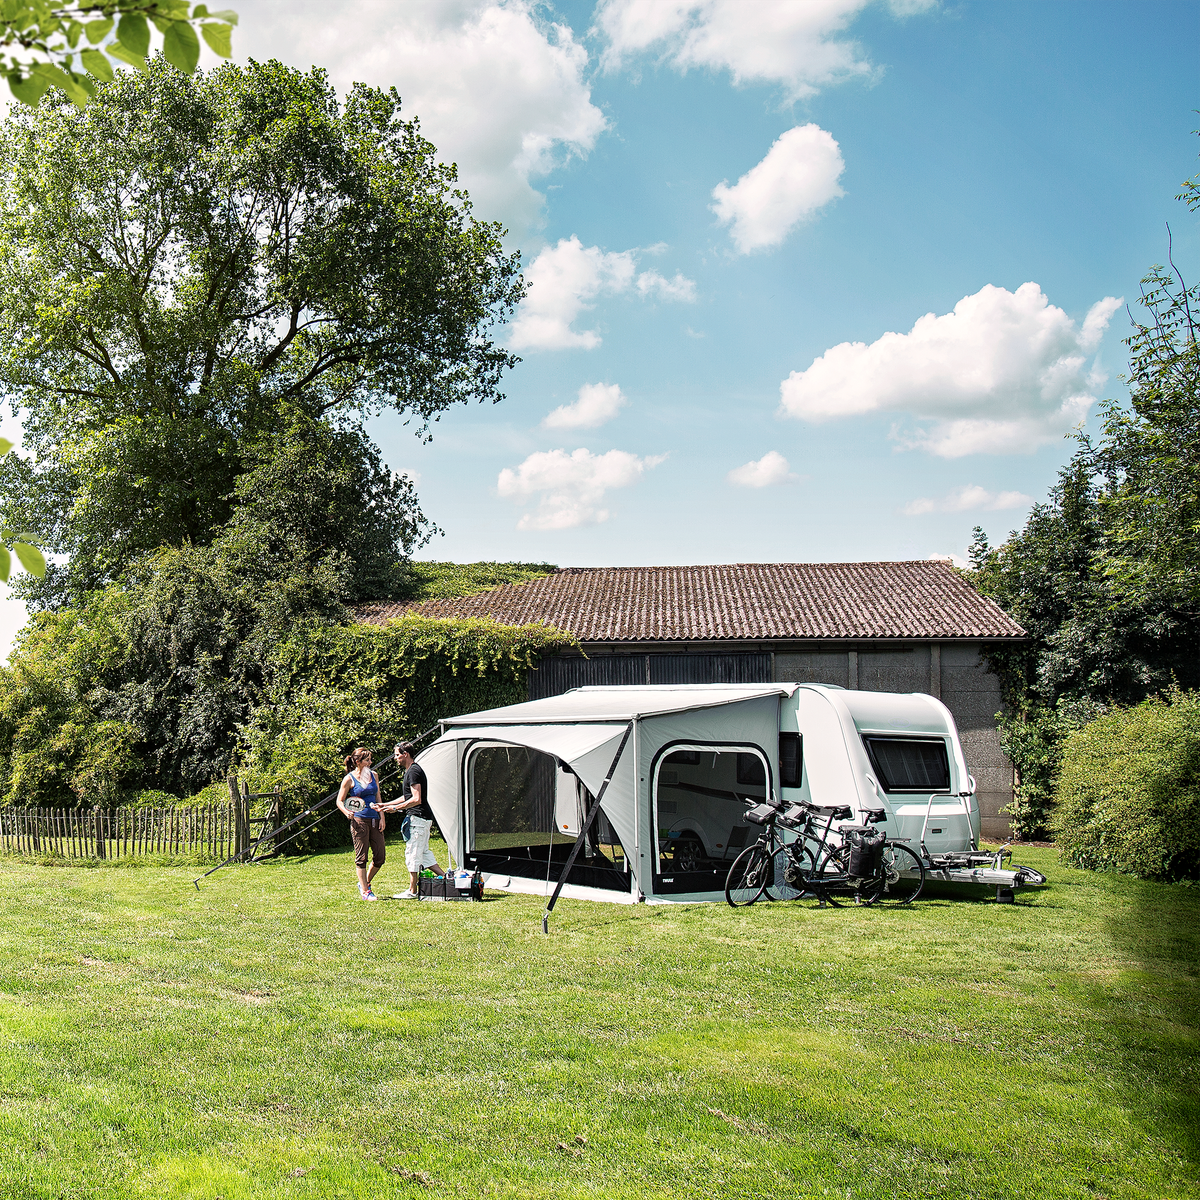 A caravan with a Thule Omnistor 1200 caravan awning and tent are parked in the grass.